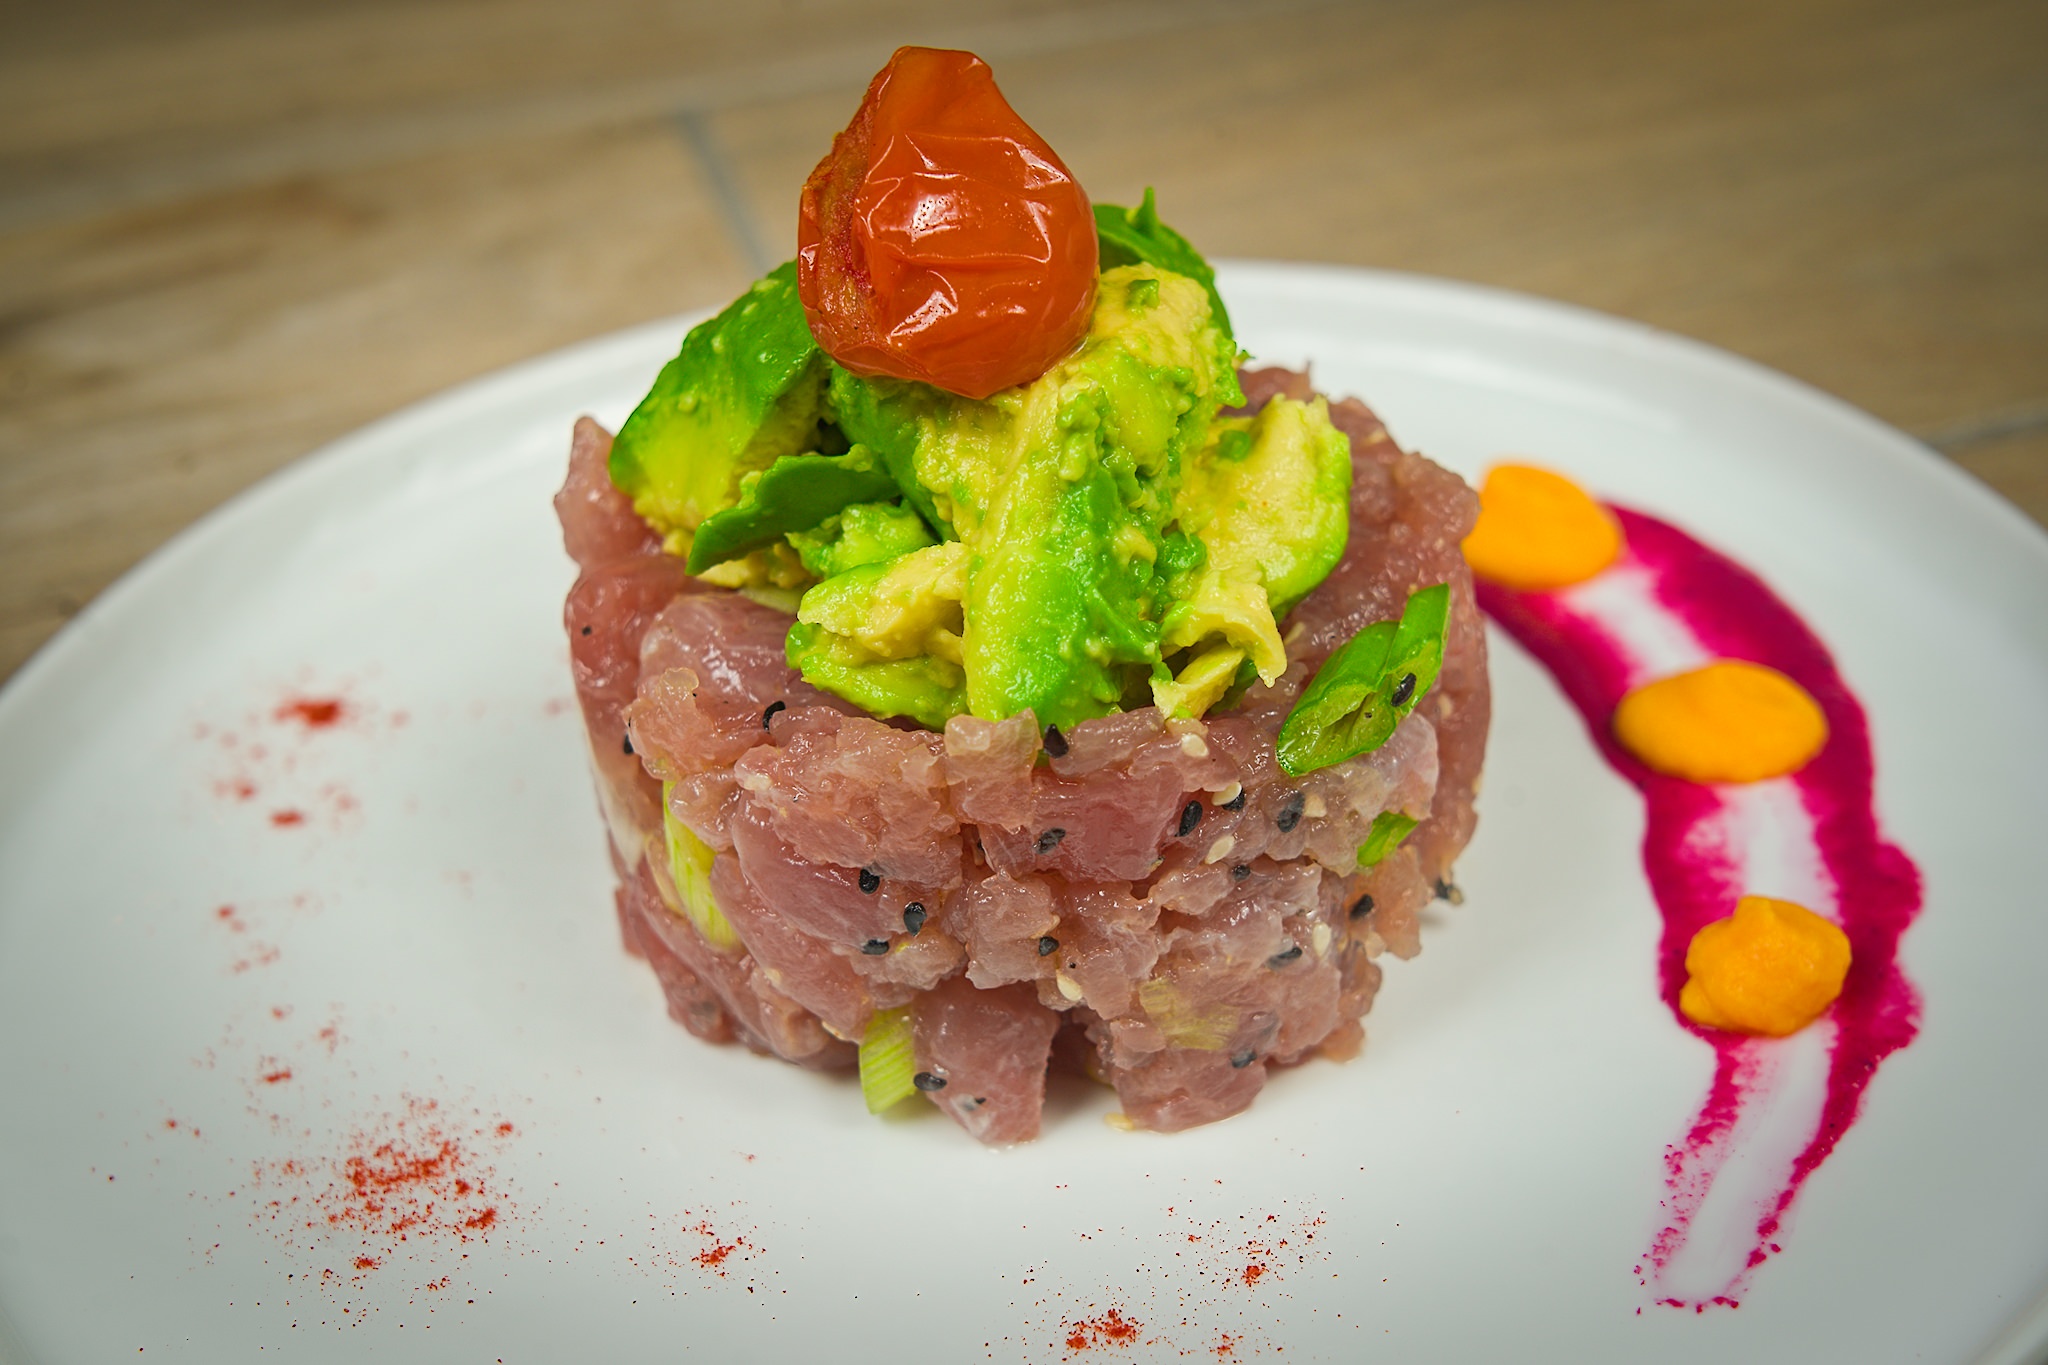 Diced Ahi Tuna and Capers, served on Garlic Mousse and topped with Avocado